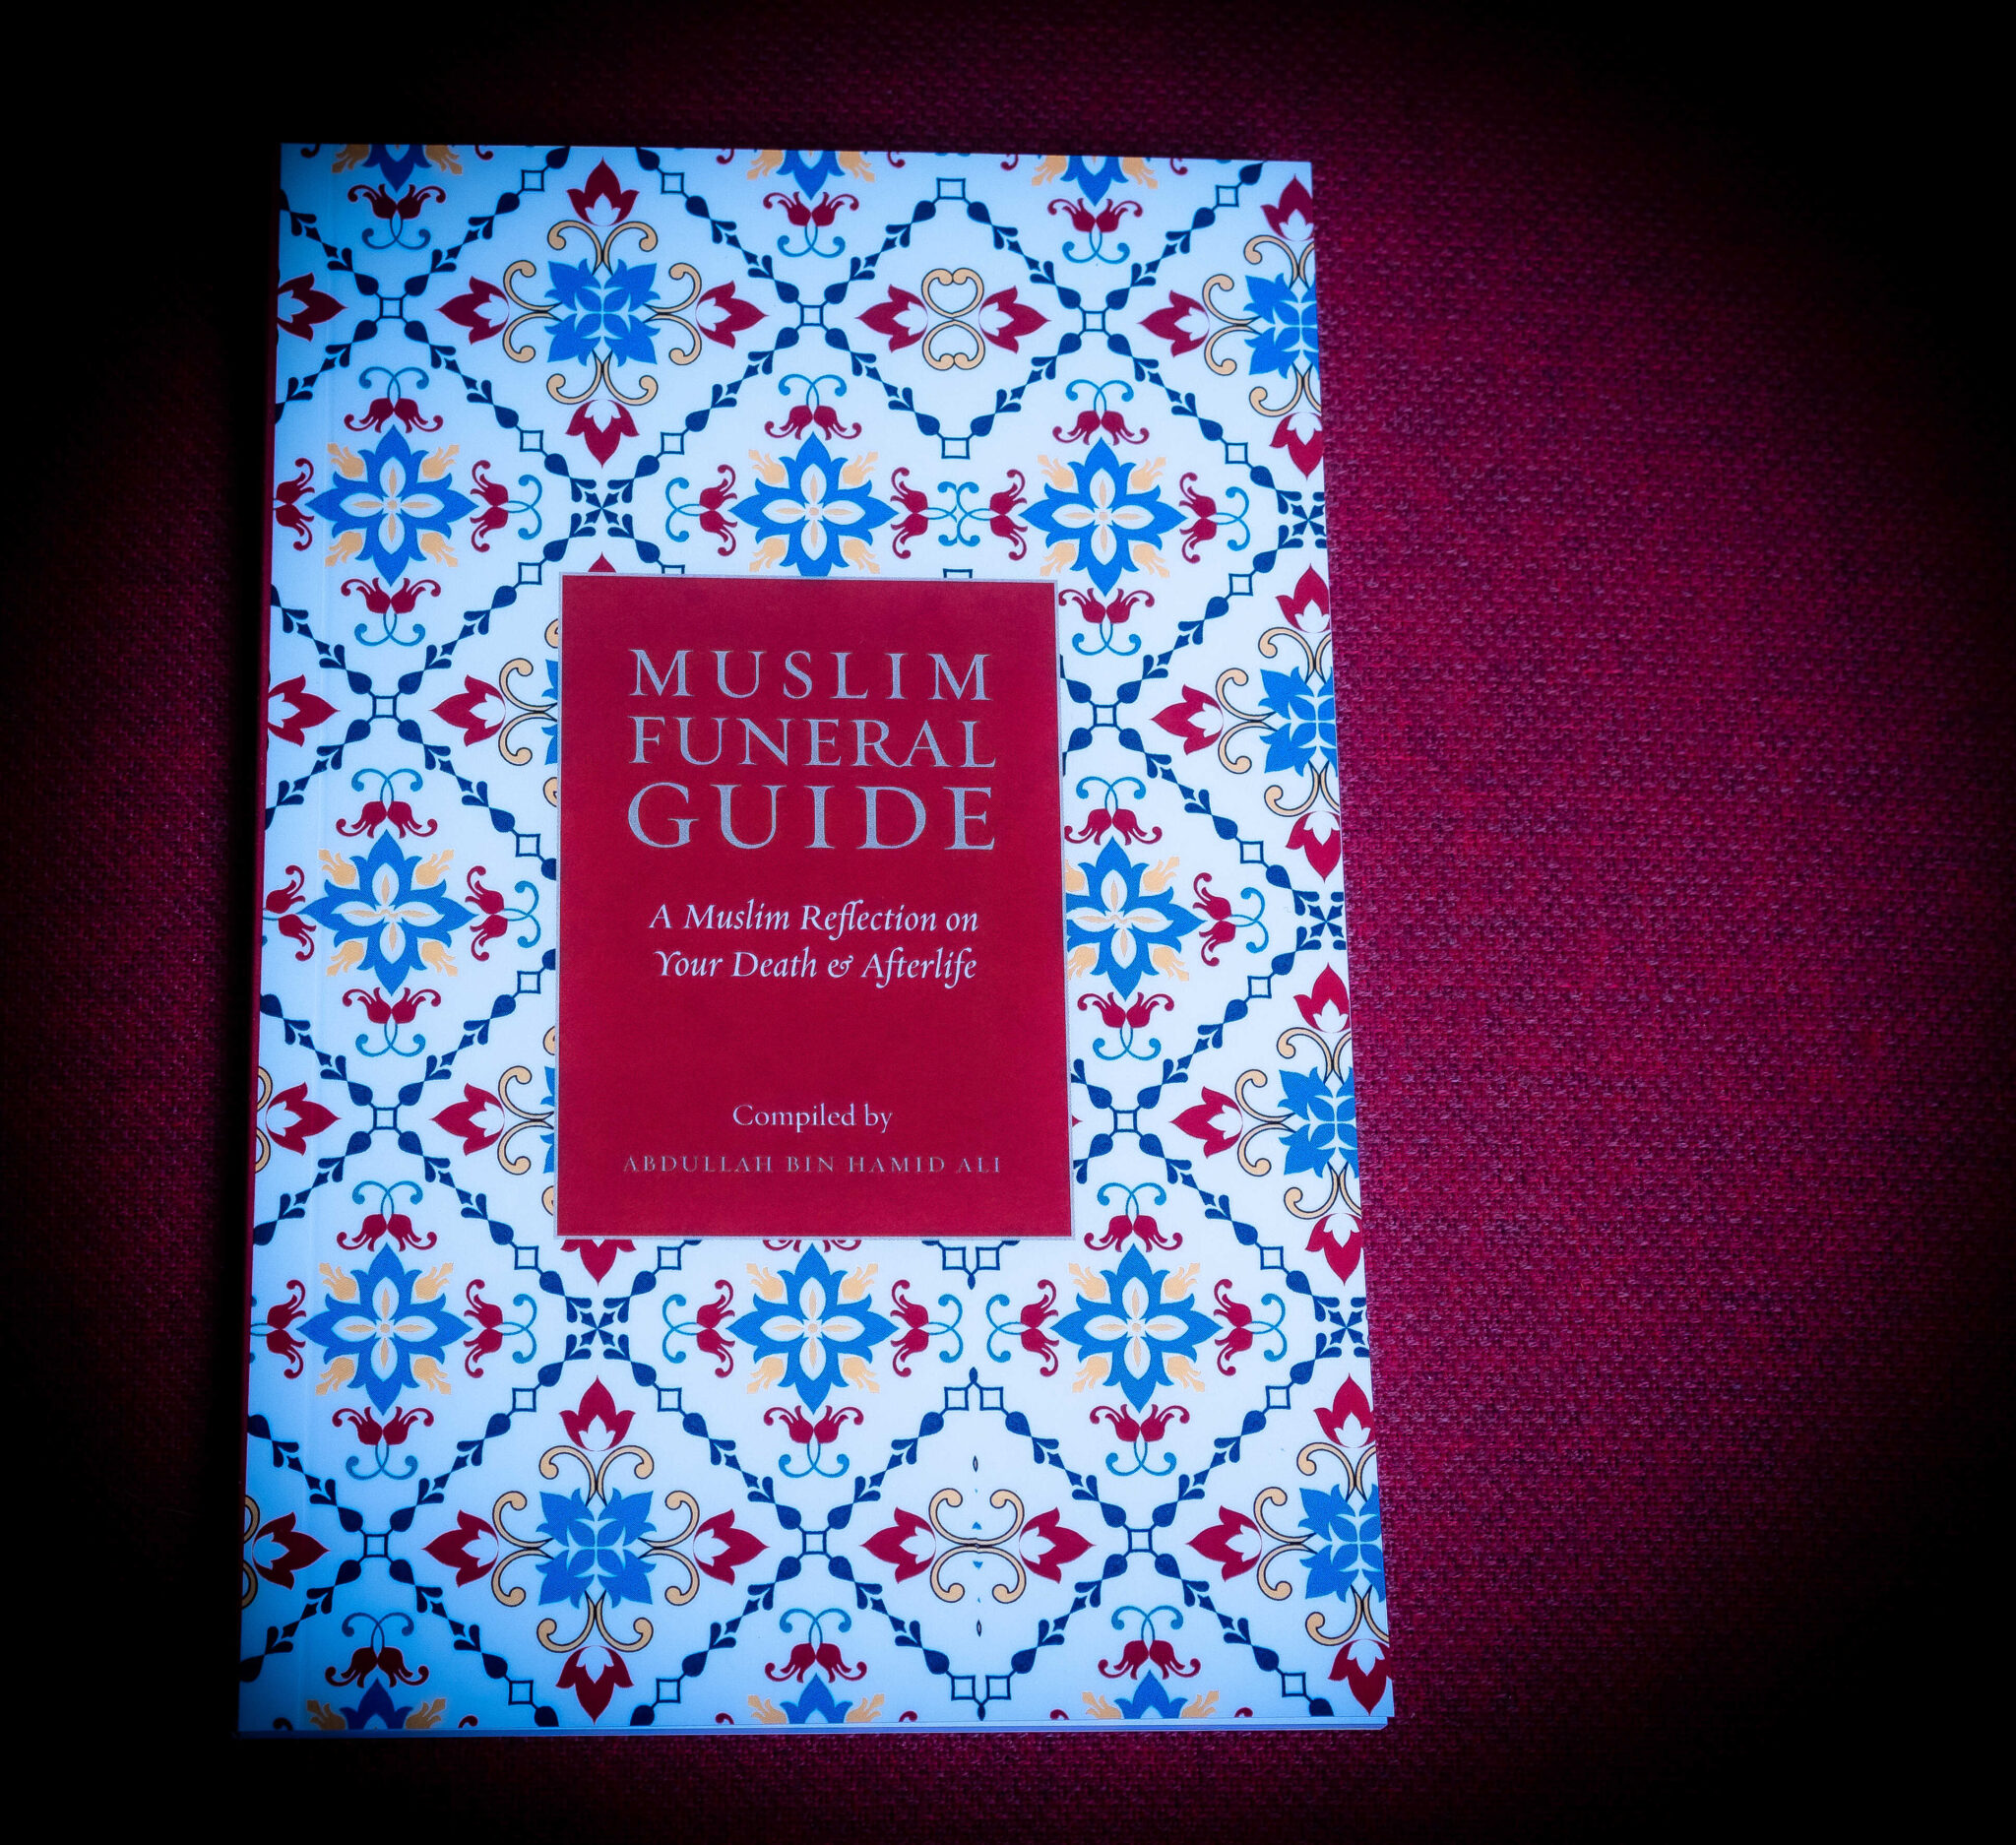 A new book from the Lamppost Education Initiative-The Muslim Funeral Guide